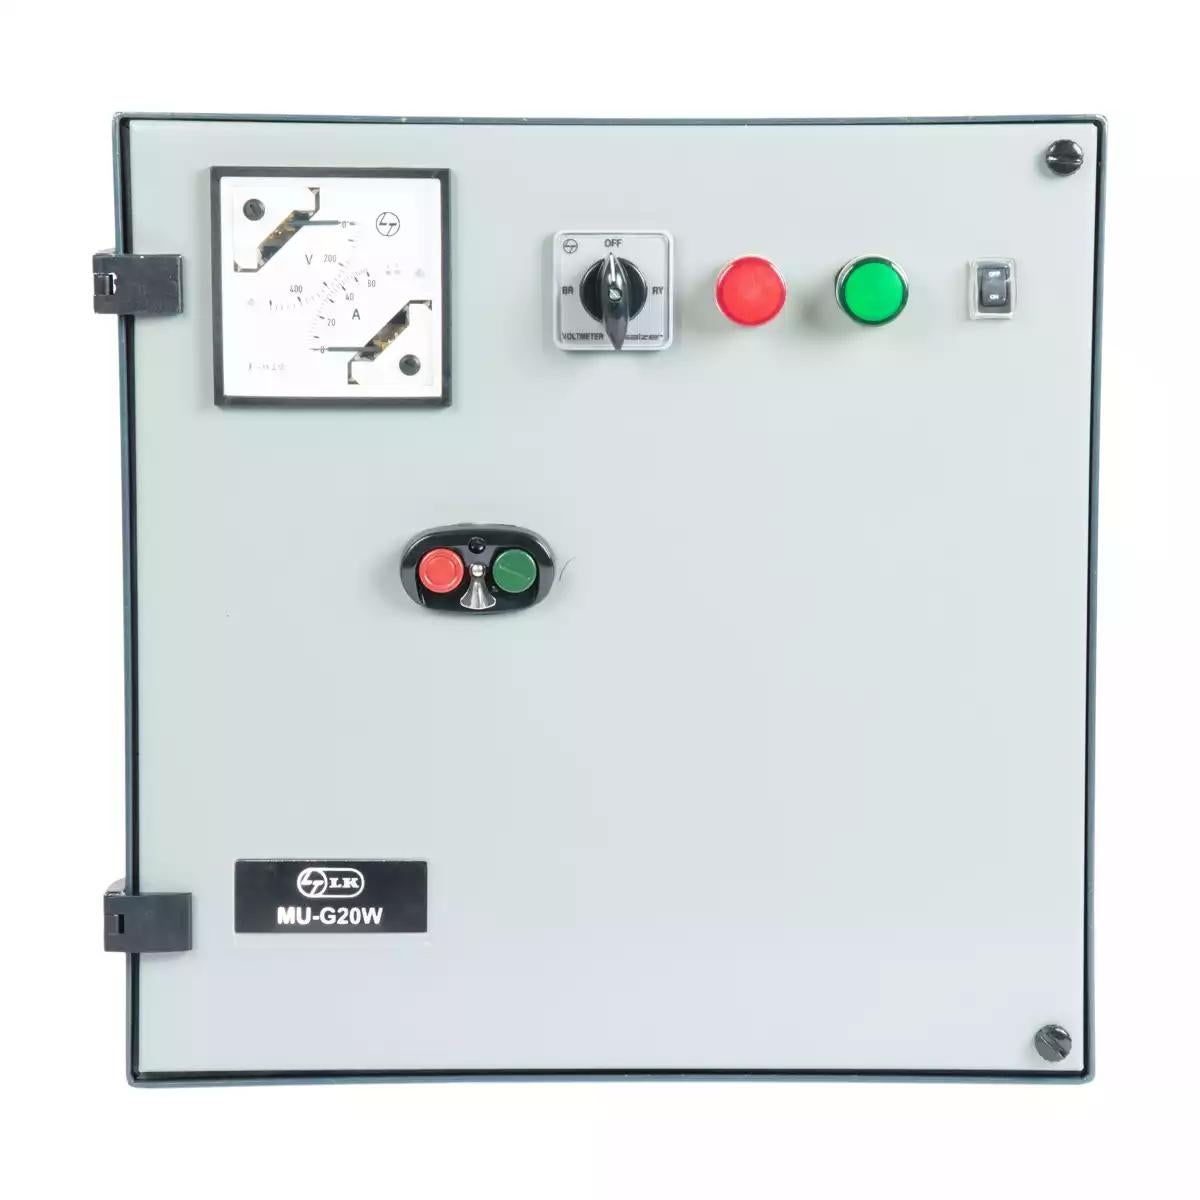 Three Phase Fully Automatic Star Delta Controller with WLC for Submersible Pump Application,MU-G20W,20HP,FASD (CS91038COEO)